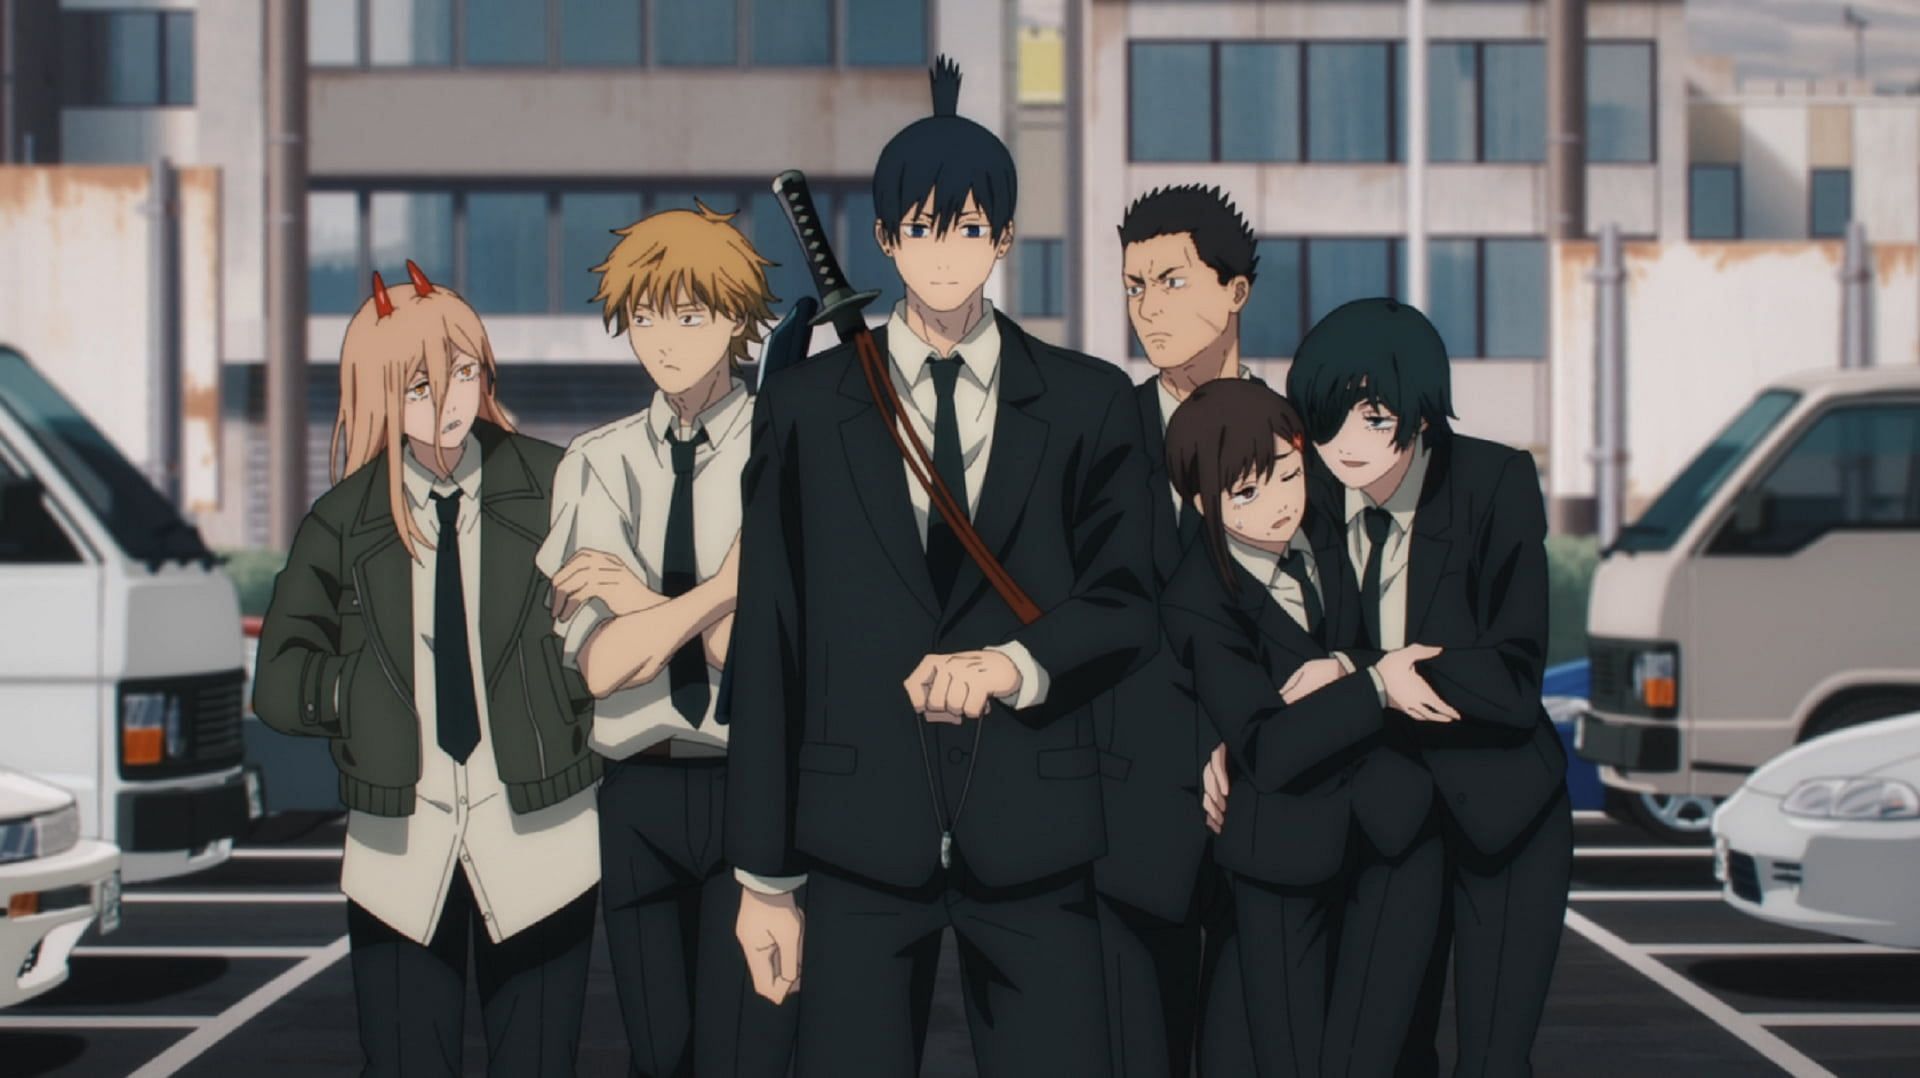 The main characters have been welcomed by international fans (image via Studio Mappa)